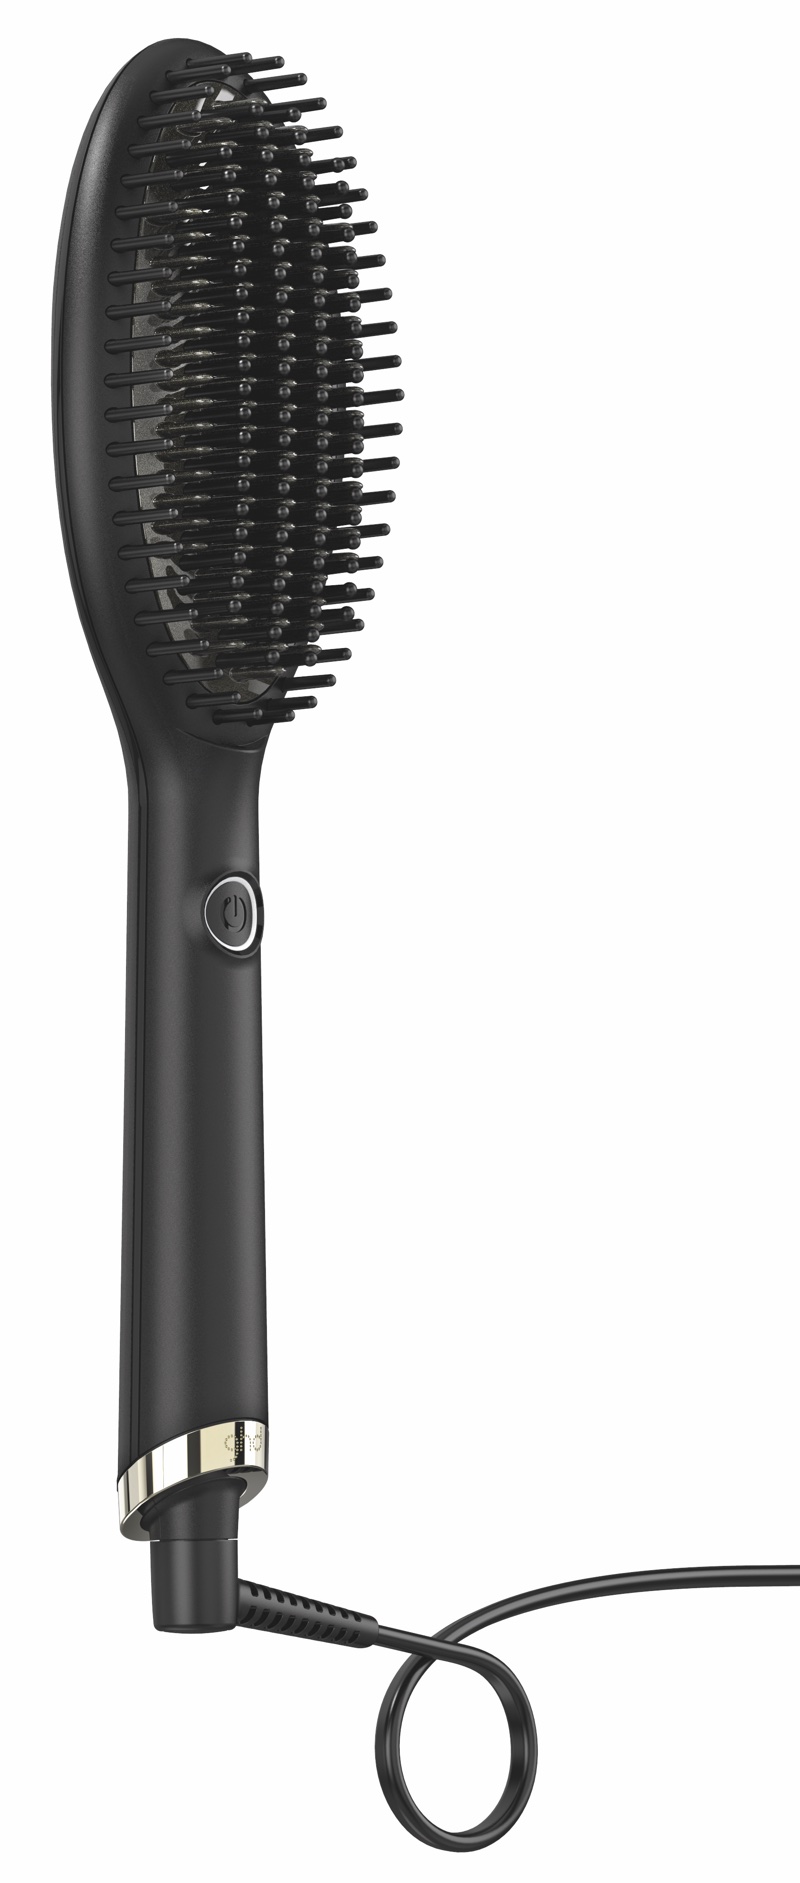 ghd reveals new convenience hair brush for heat styling